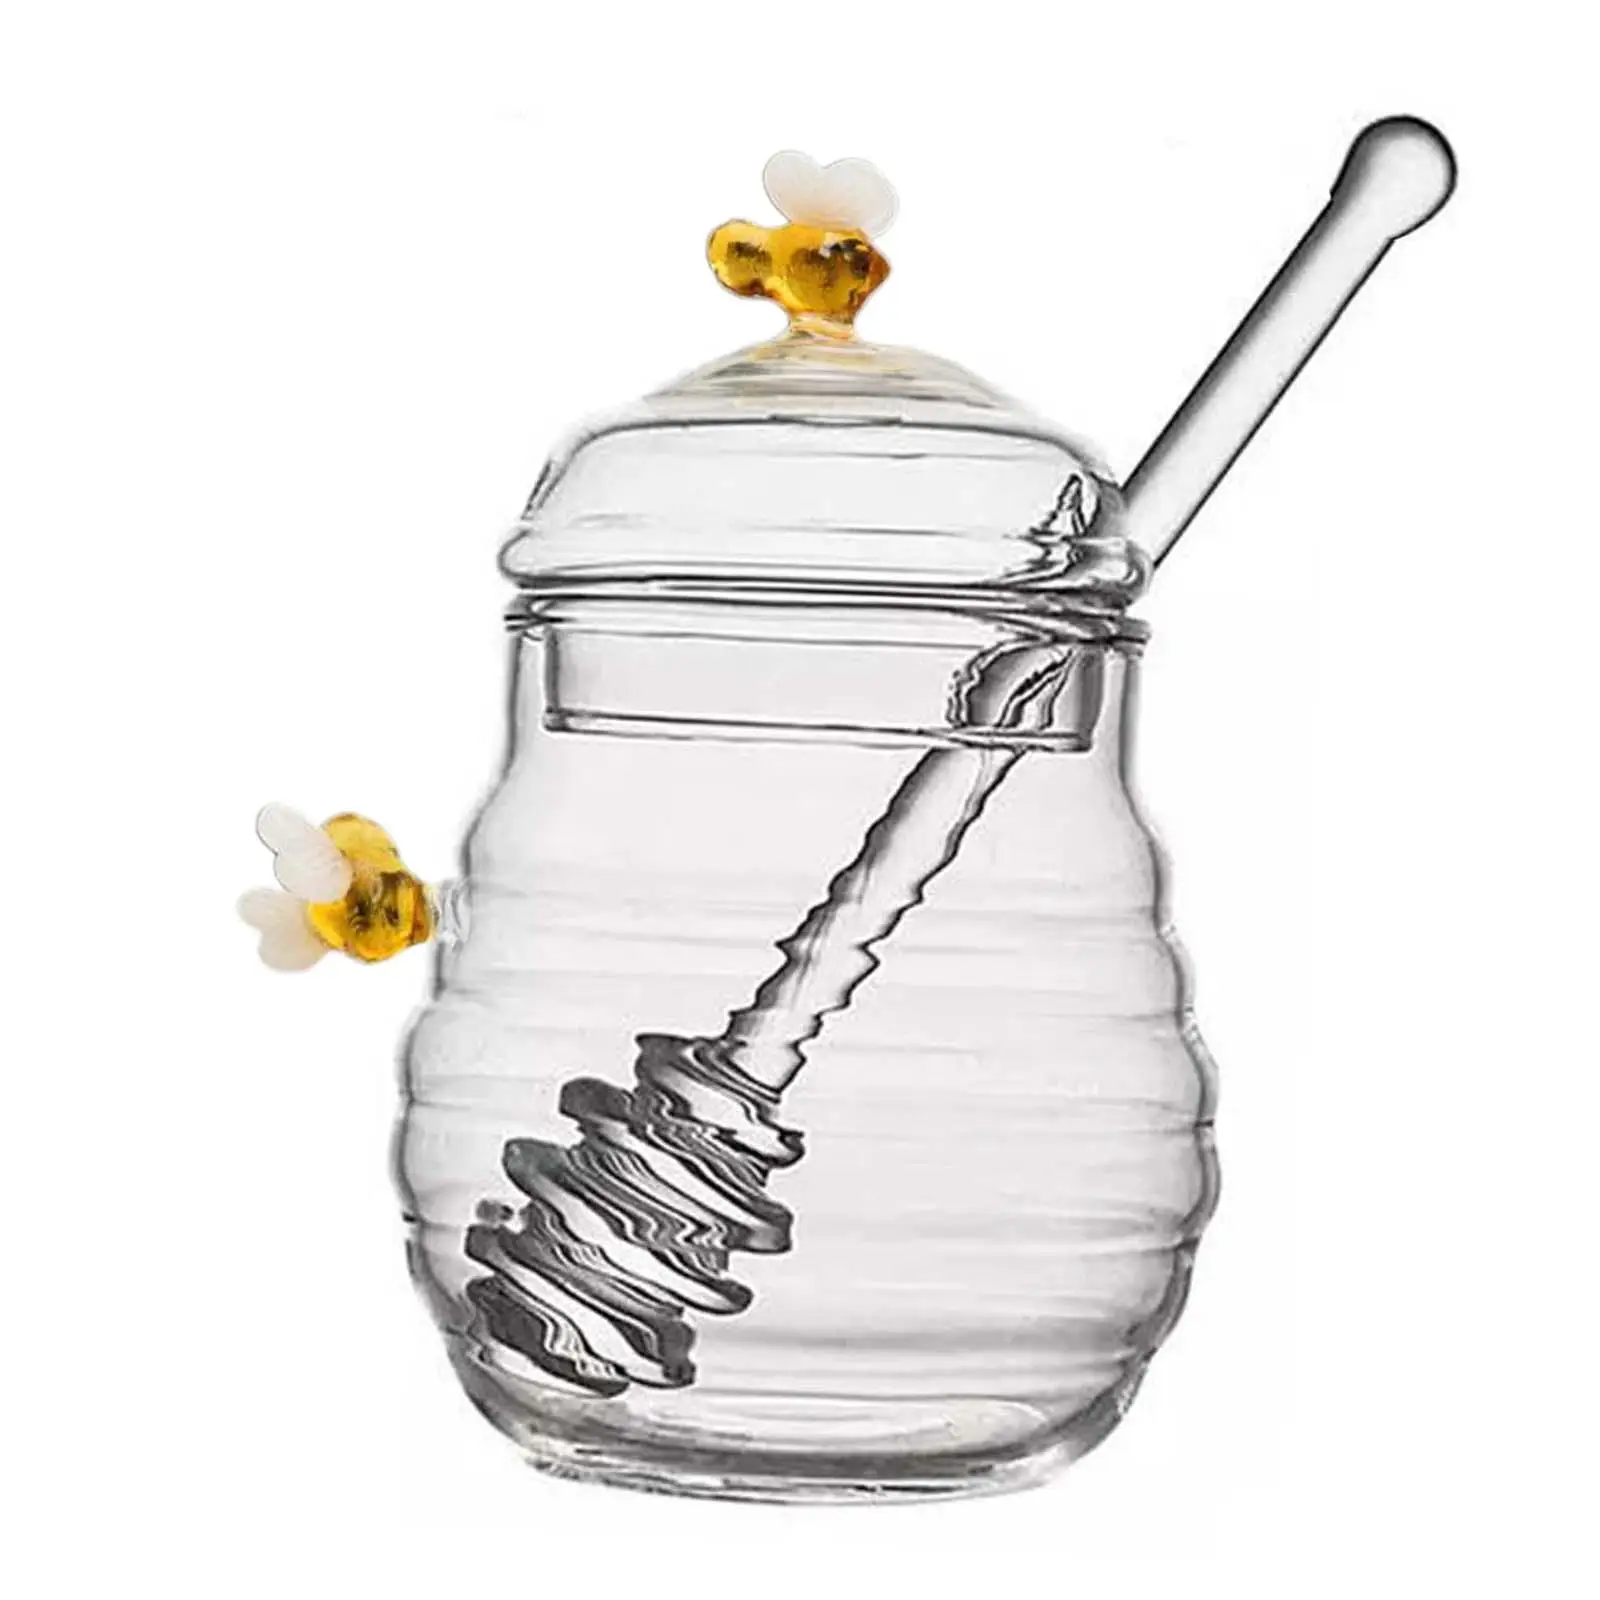 Transparent Honey Storage Container, Honey Bee Pot with Dipper and Lid, , Glass Beehive Honey Pot for Home Syrup